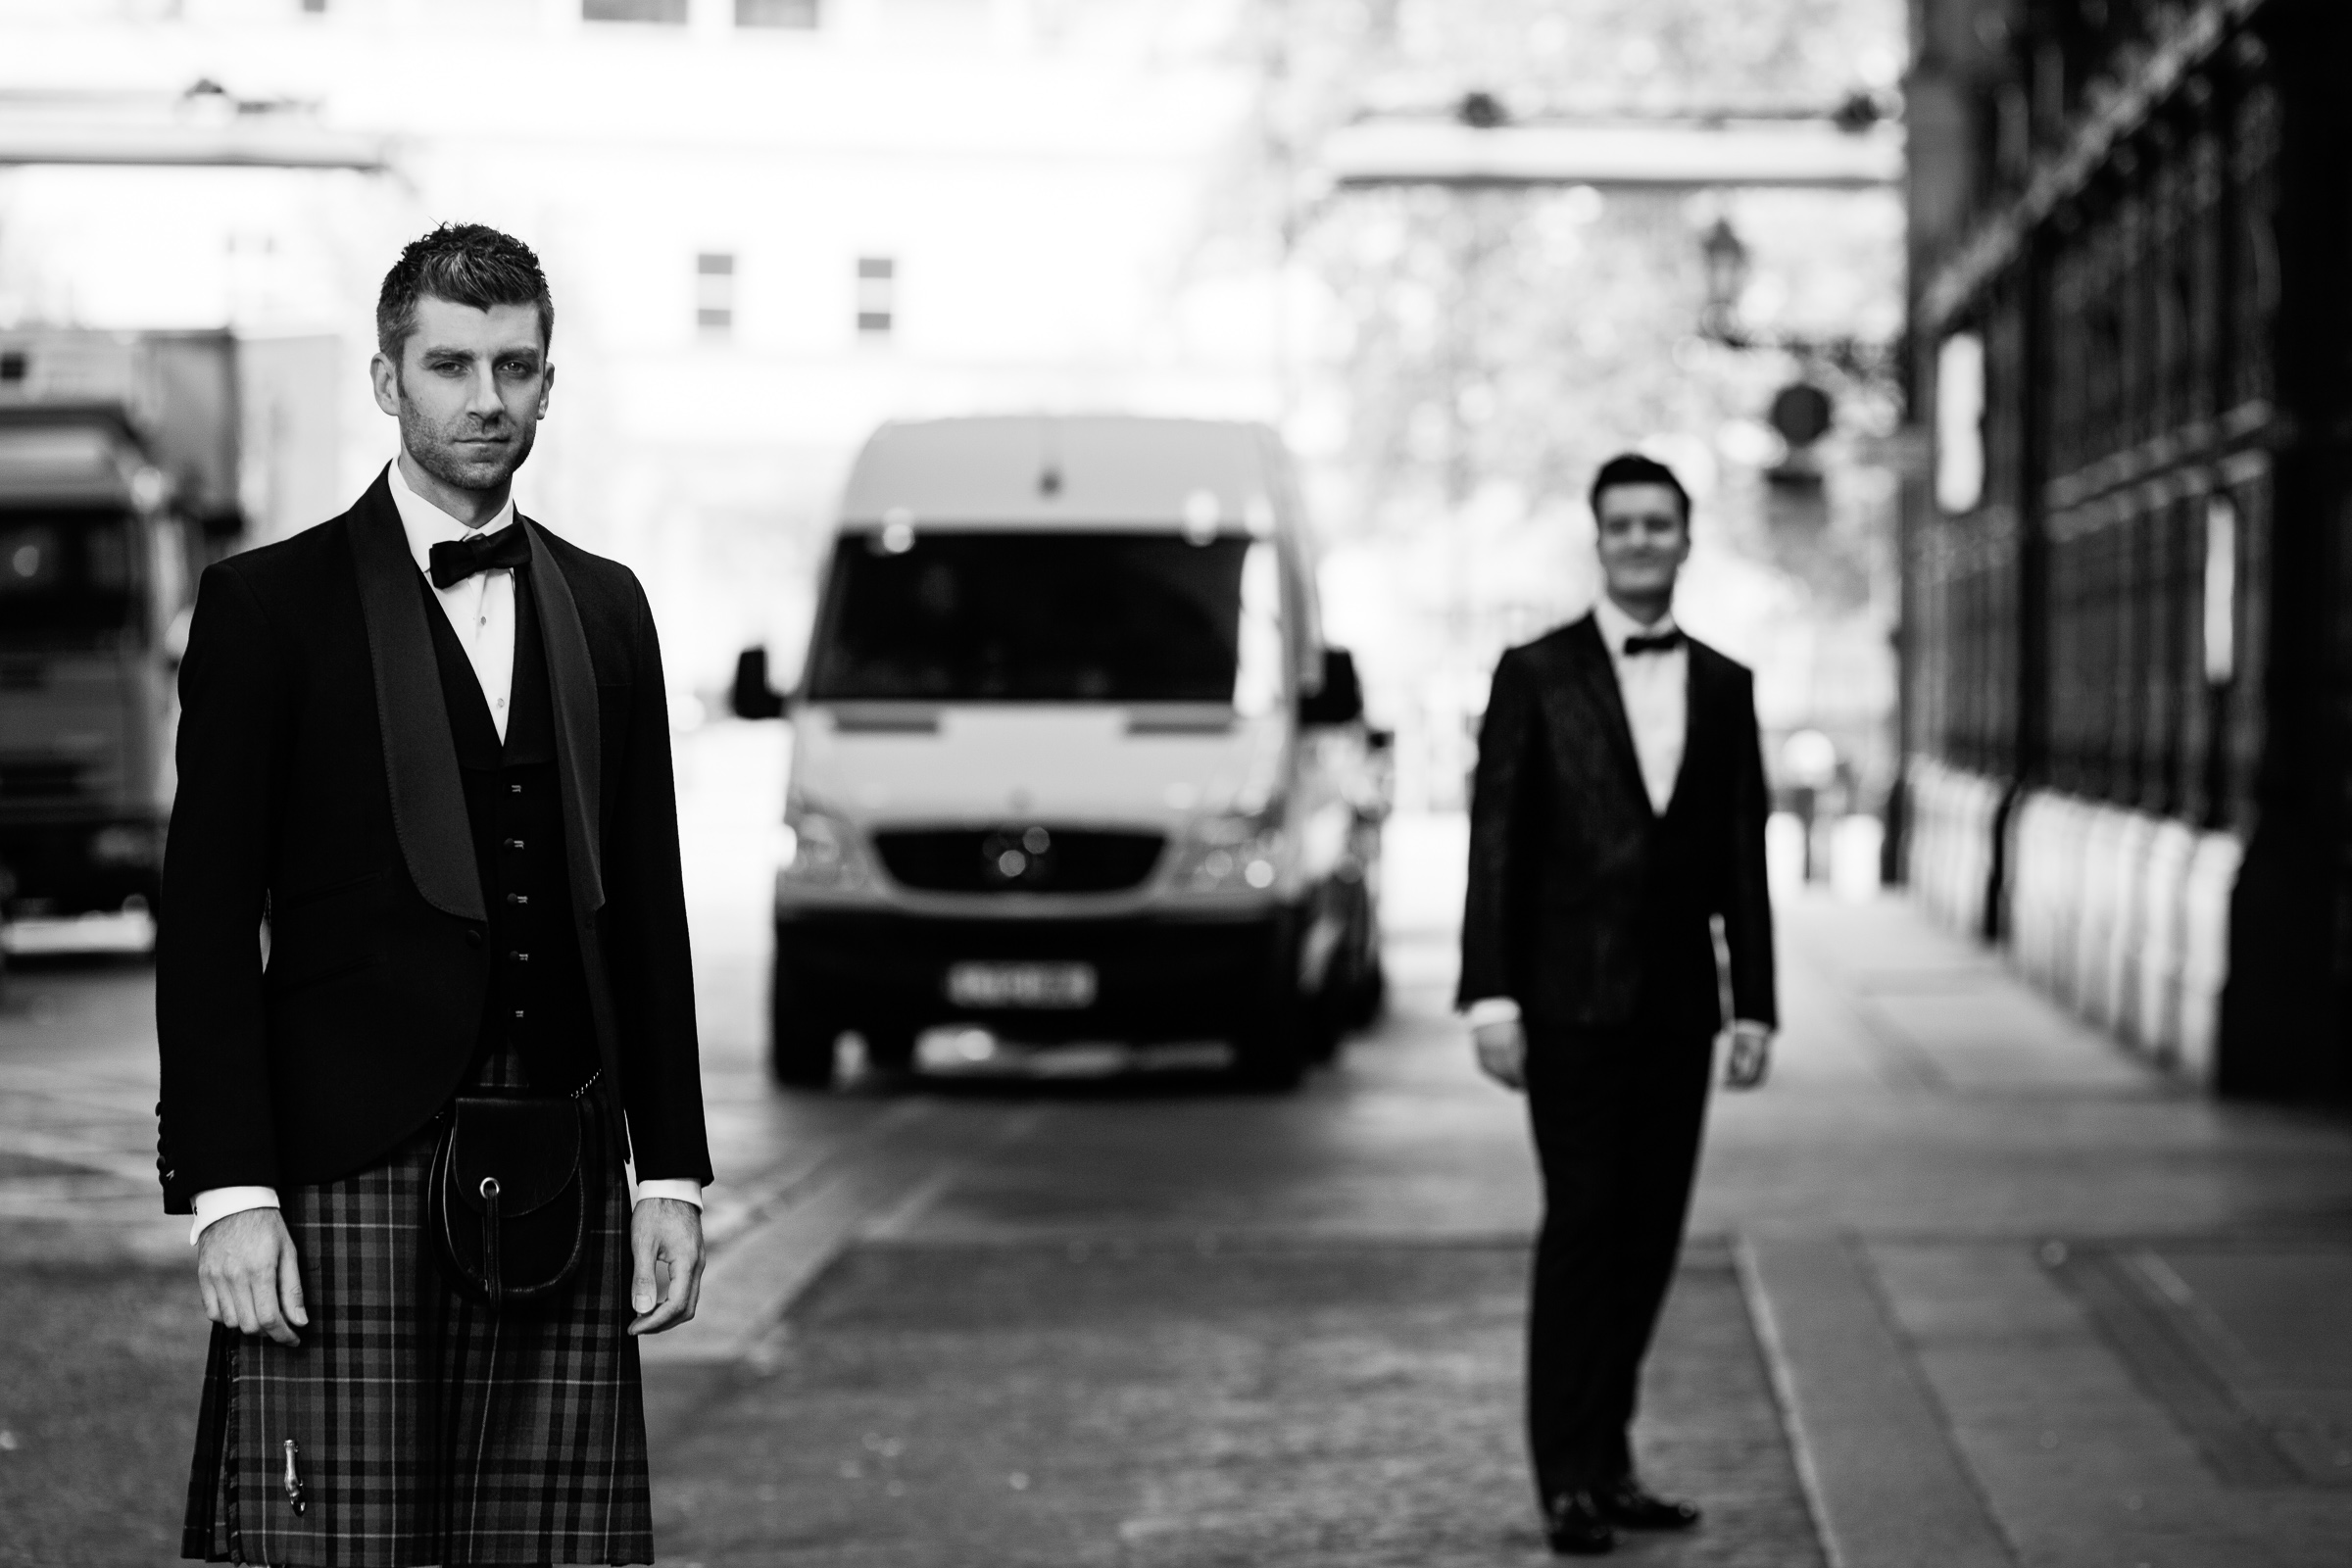 A portrait of two men on the way to their civil partnership ceremony at the Haberdashers' Hall in Smithfield. The man in the foreground is wearing kilt at bow tie. the ban behind is in black tie. There is a white van in the road.